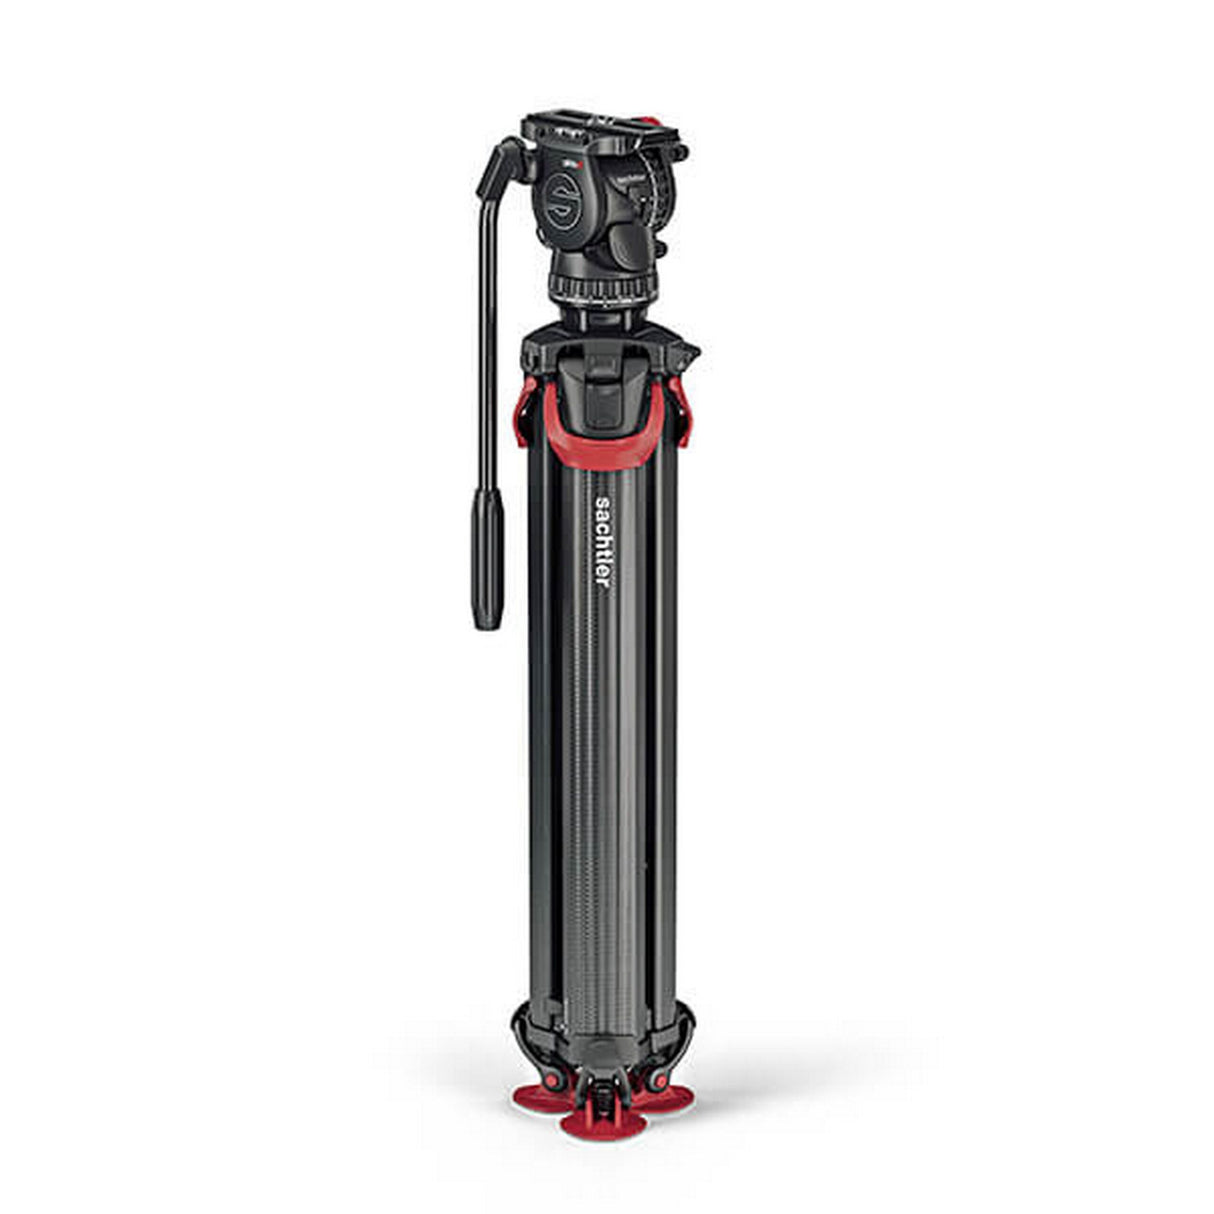 Sachtler S2068S-FTMS System aktiv8 flowtech75 MS Tripod with Spreader, Handle and Bag